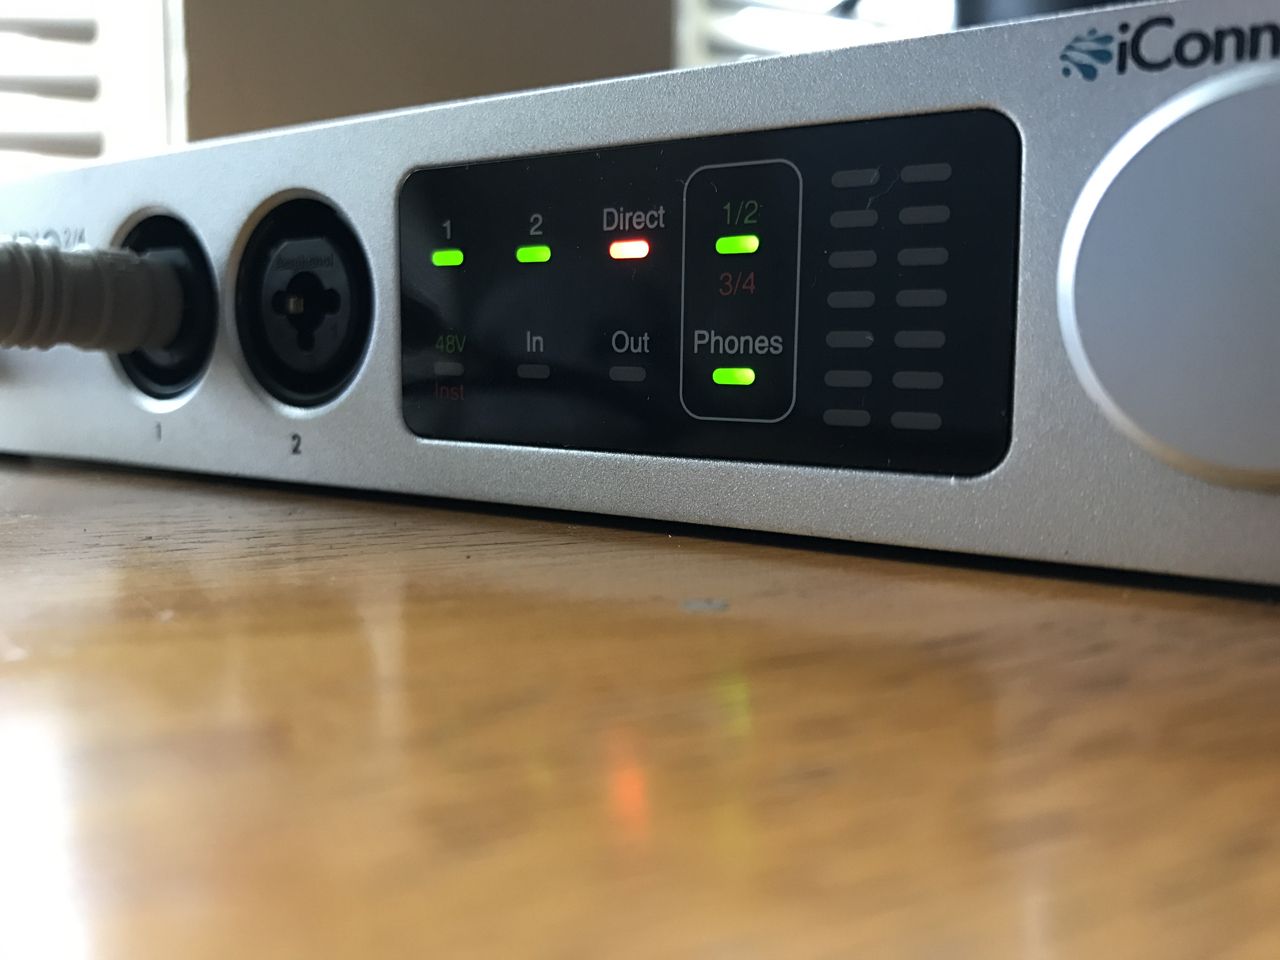 iConnectivity ConnectAUDIO2/4 Touch Controlled 2-Input 4-Output Audio & MIDI Interface caudio-24